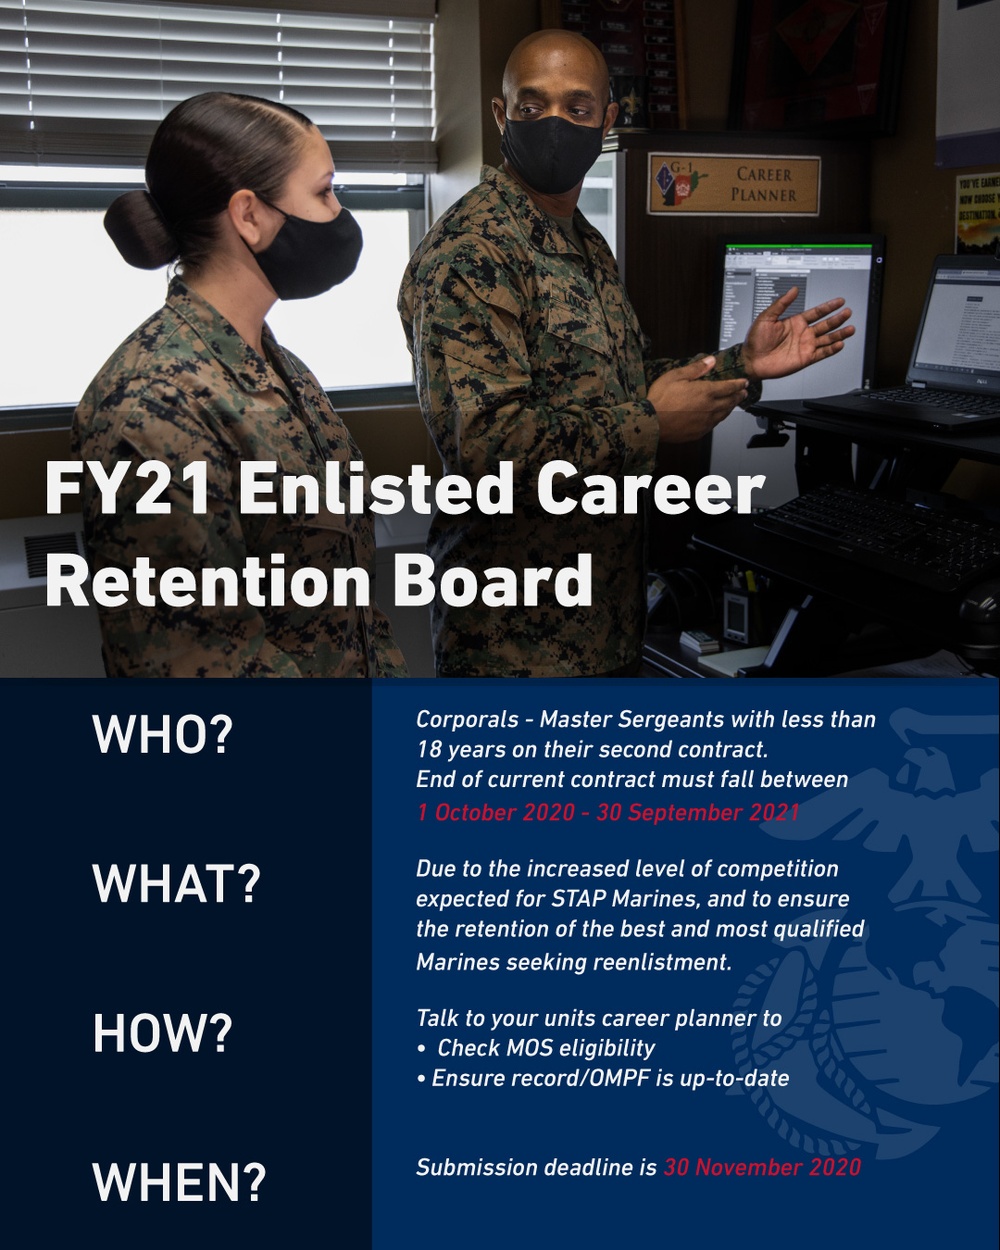 FY21 Enlisted Career Retention Board